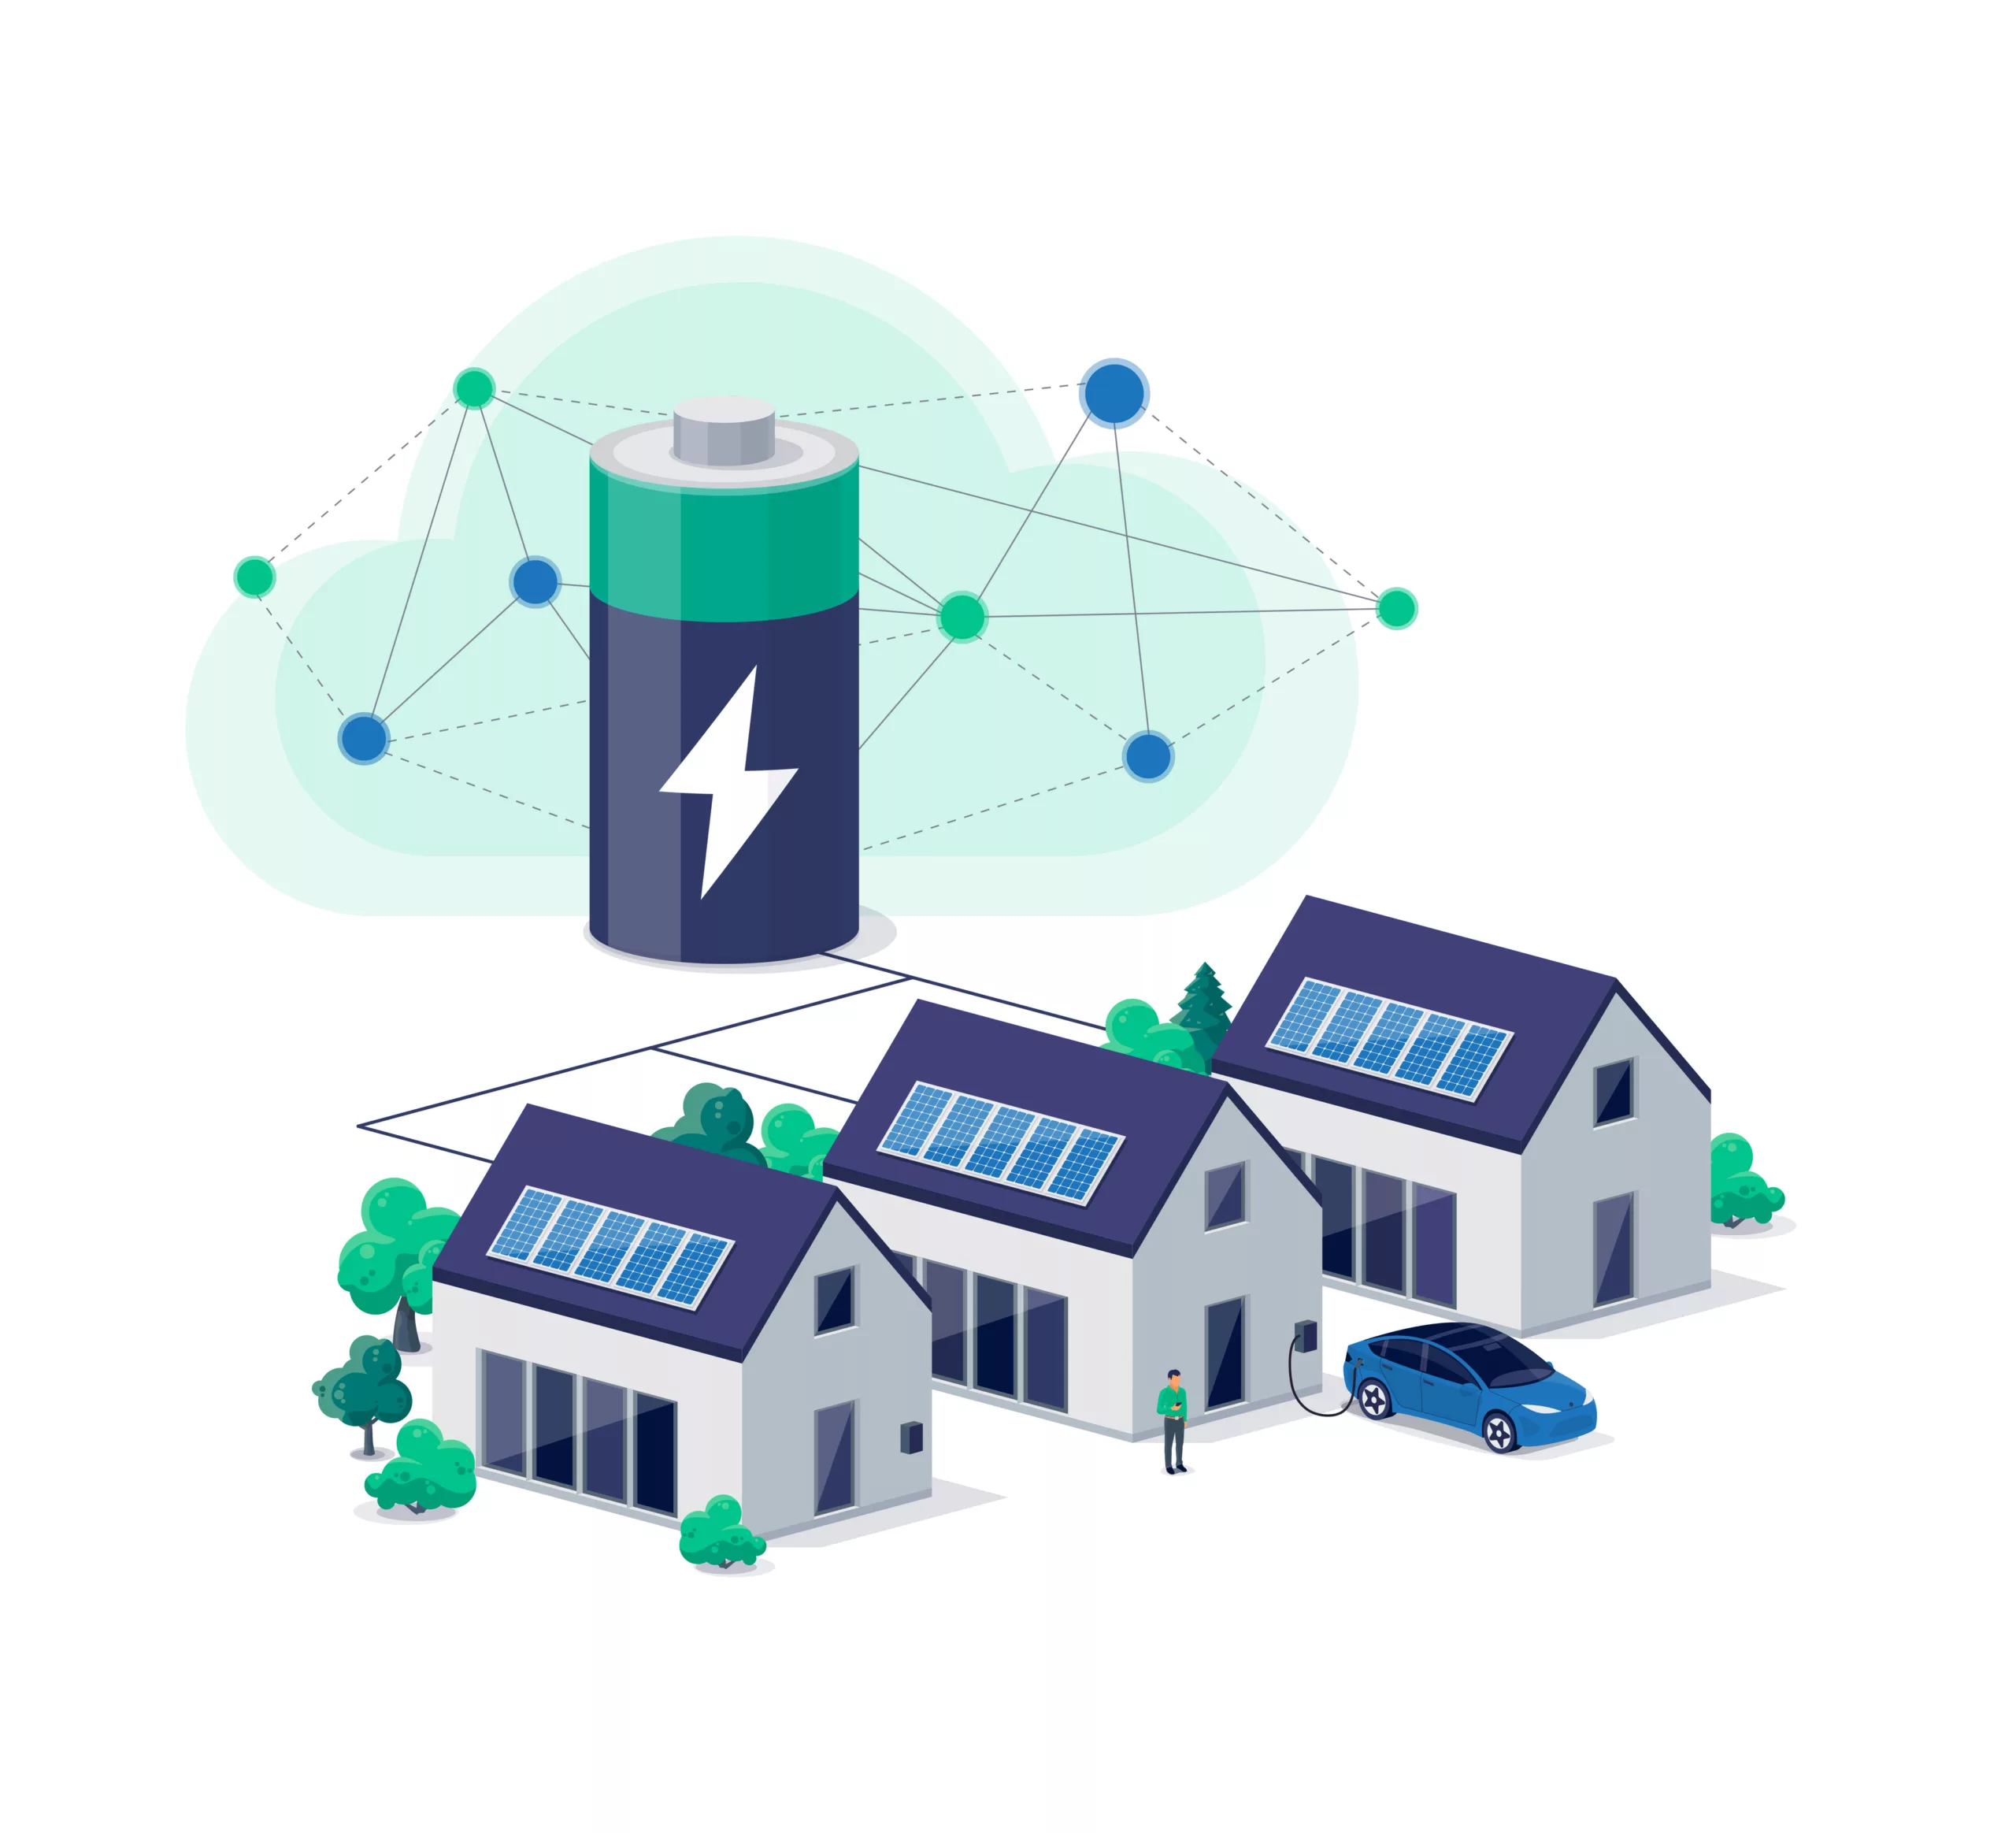 Home virtual power plant battery energy storage with house photovoltaic solar panels on roof and rechargeable li-ion electricity backup. Electric car charging on renewable smart island off-grid system